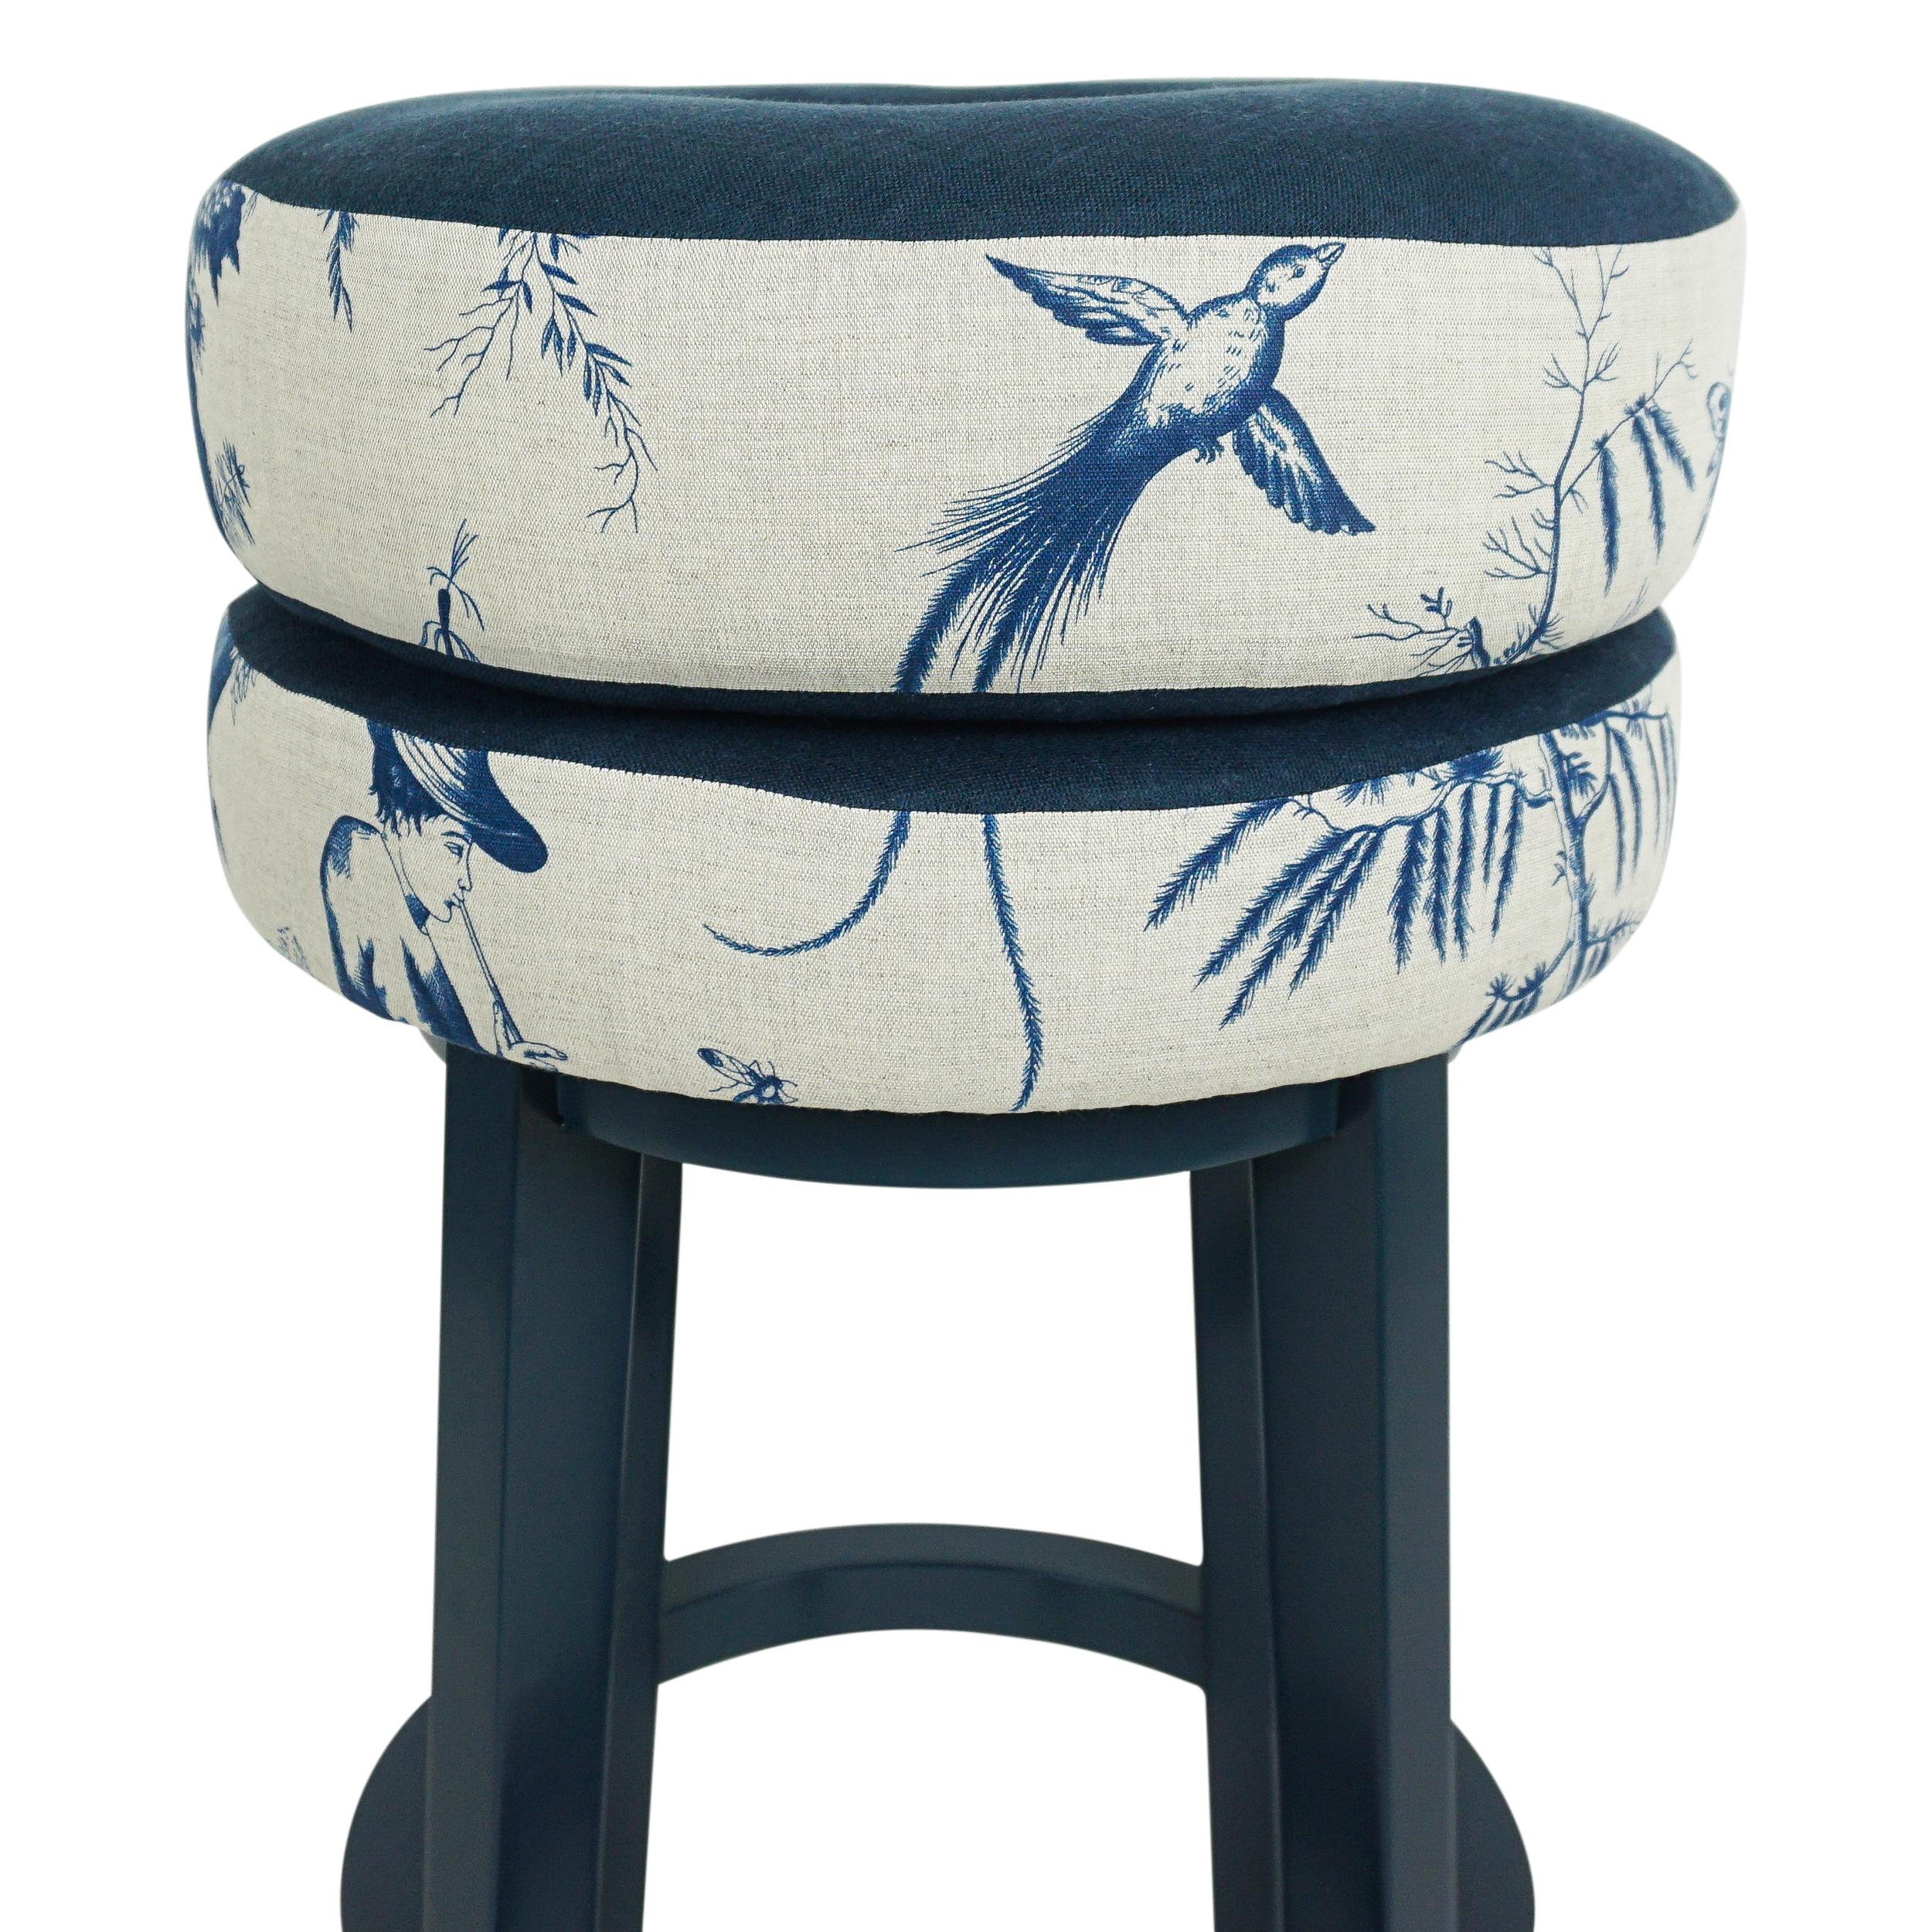 Hand-Painted Modern Donut Shaped Bar Stool with Japanese Inspired Shengyou Toile For Sale